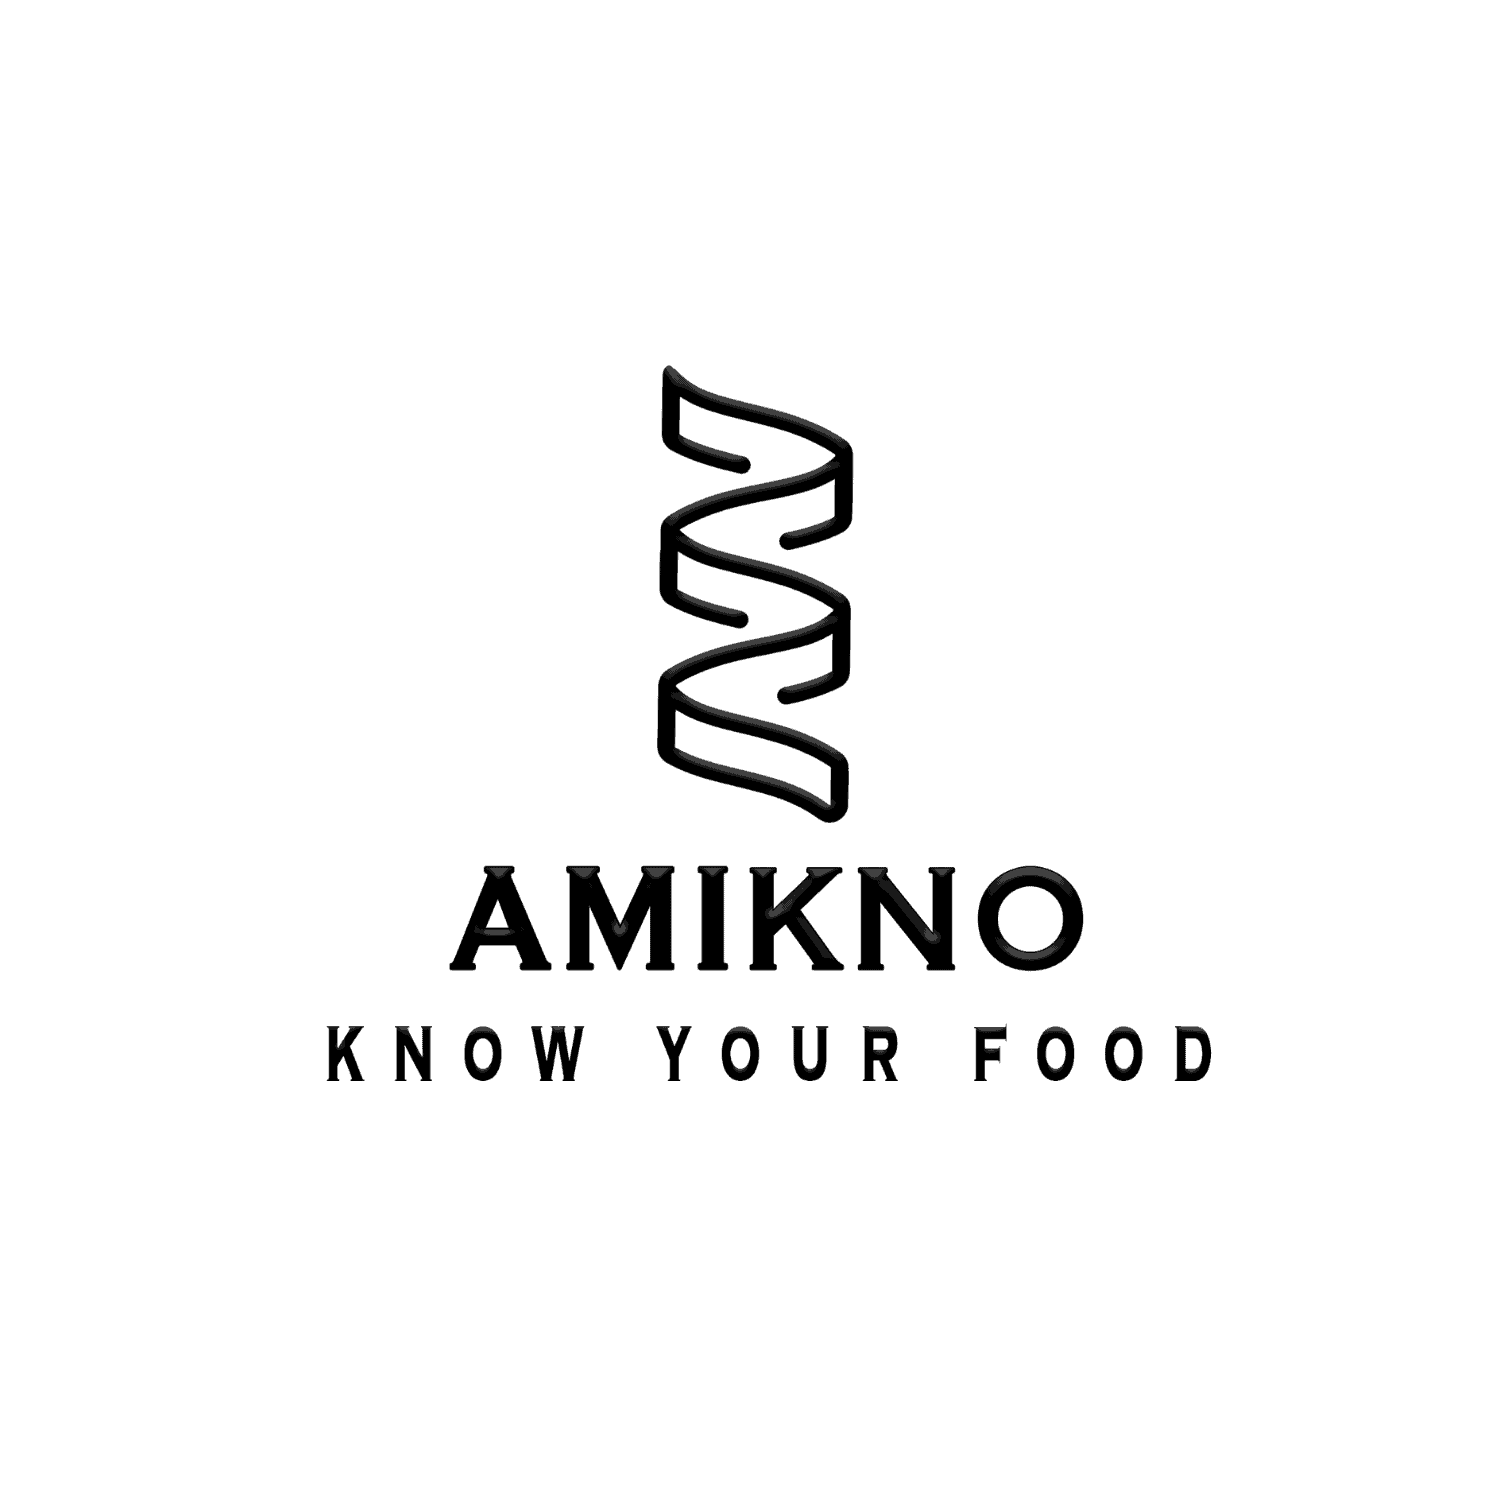 amikno know your food logo